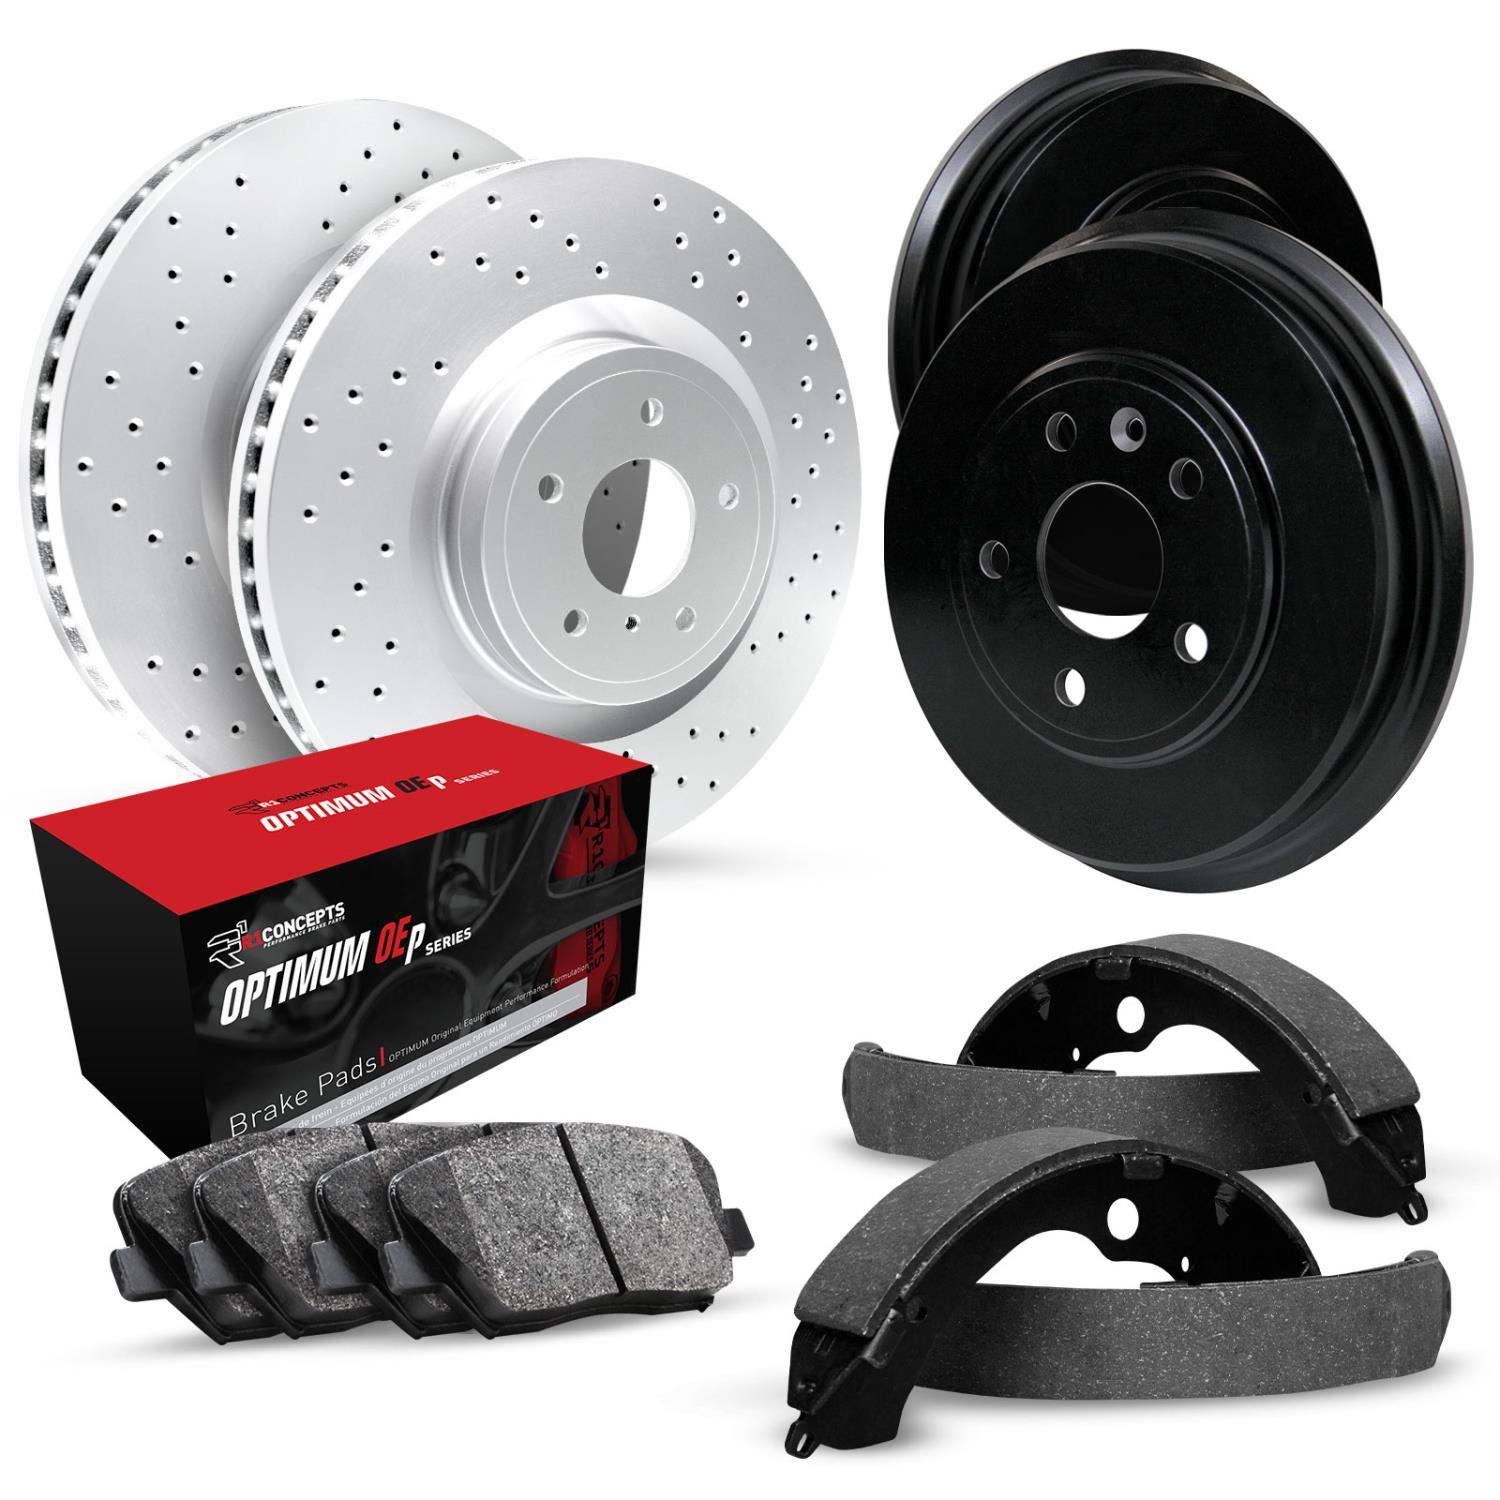 GEO-Carbon Drilled Brake Rotor & Drum Set w/Optimum OE Pads & Shoes, 1969-1974 GM, Position: Front & Rear